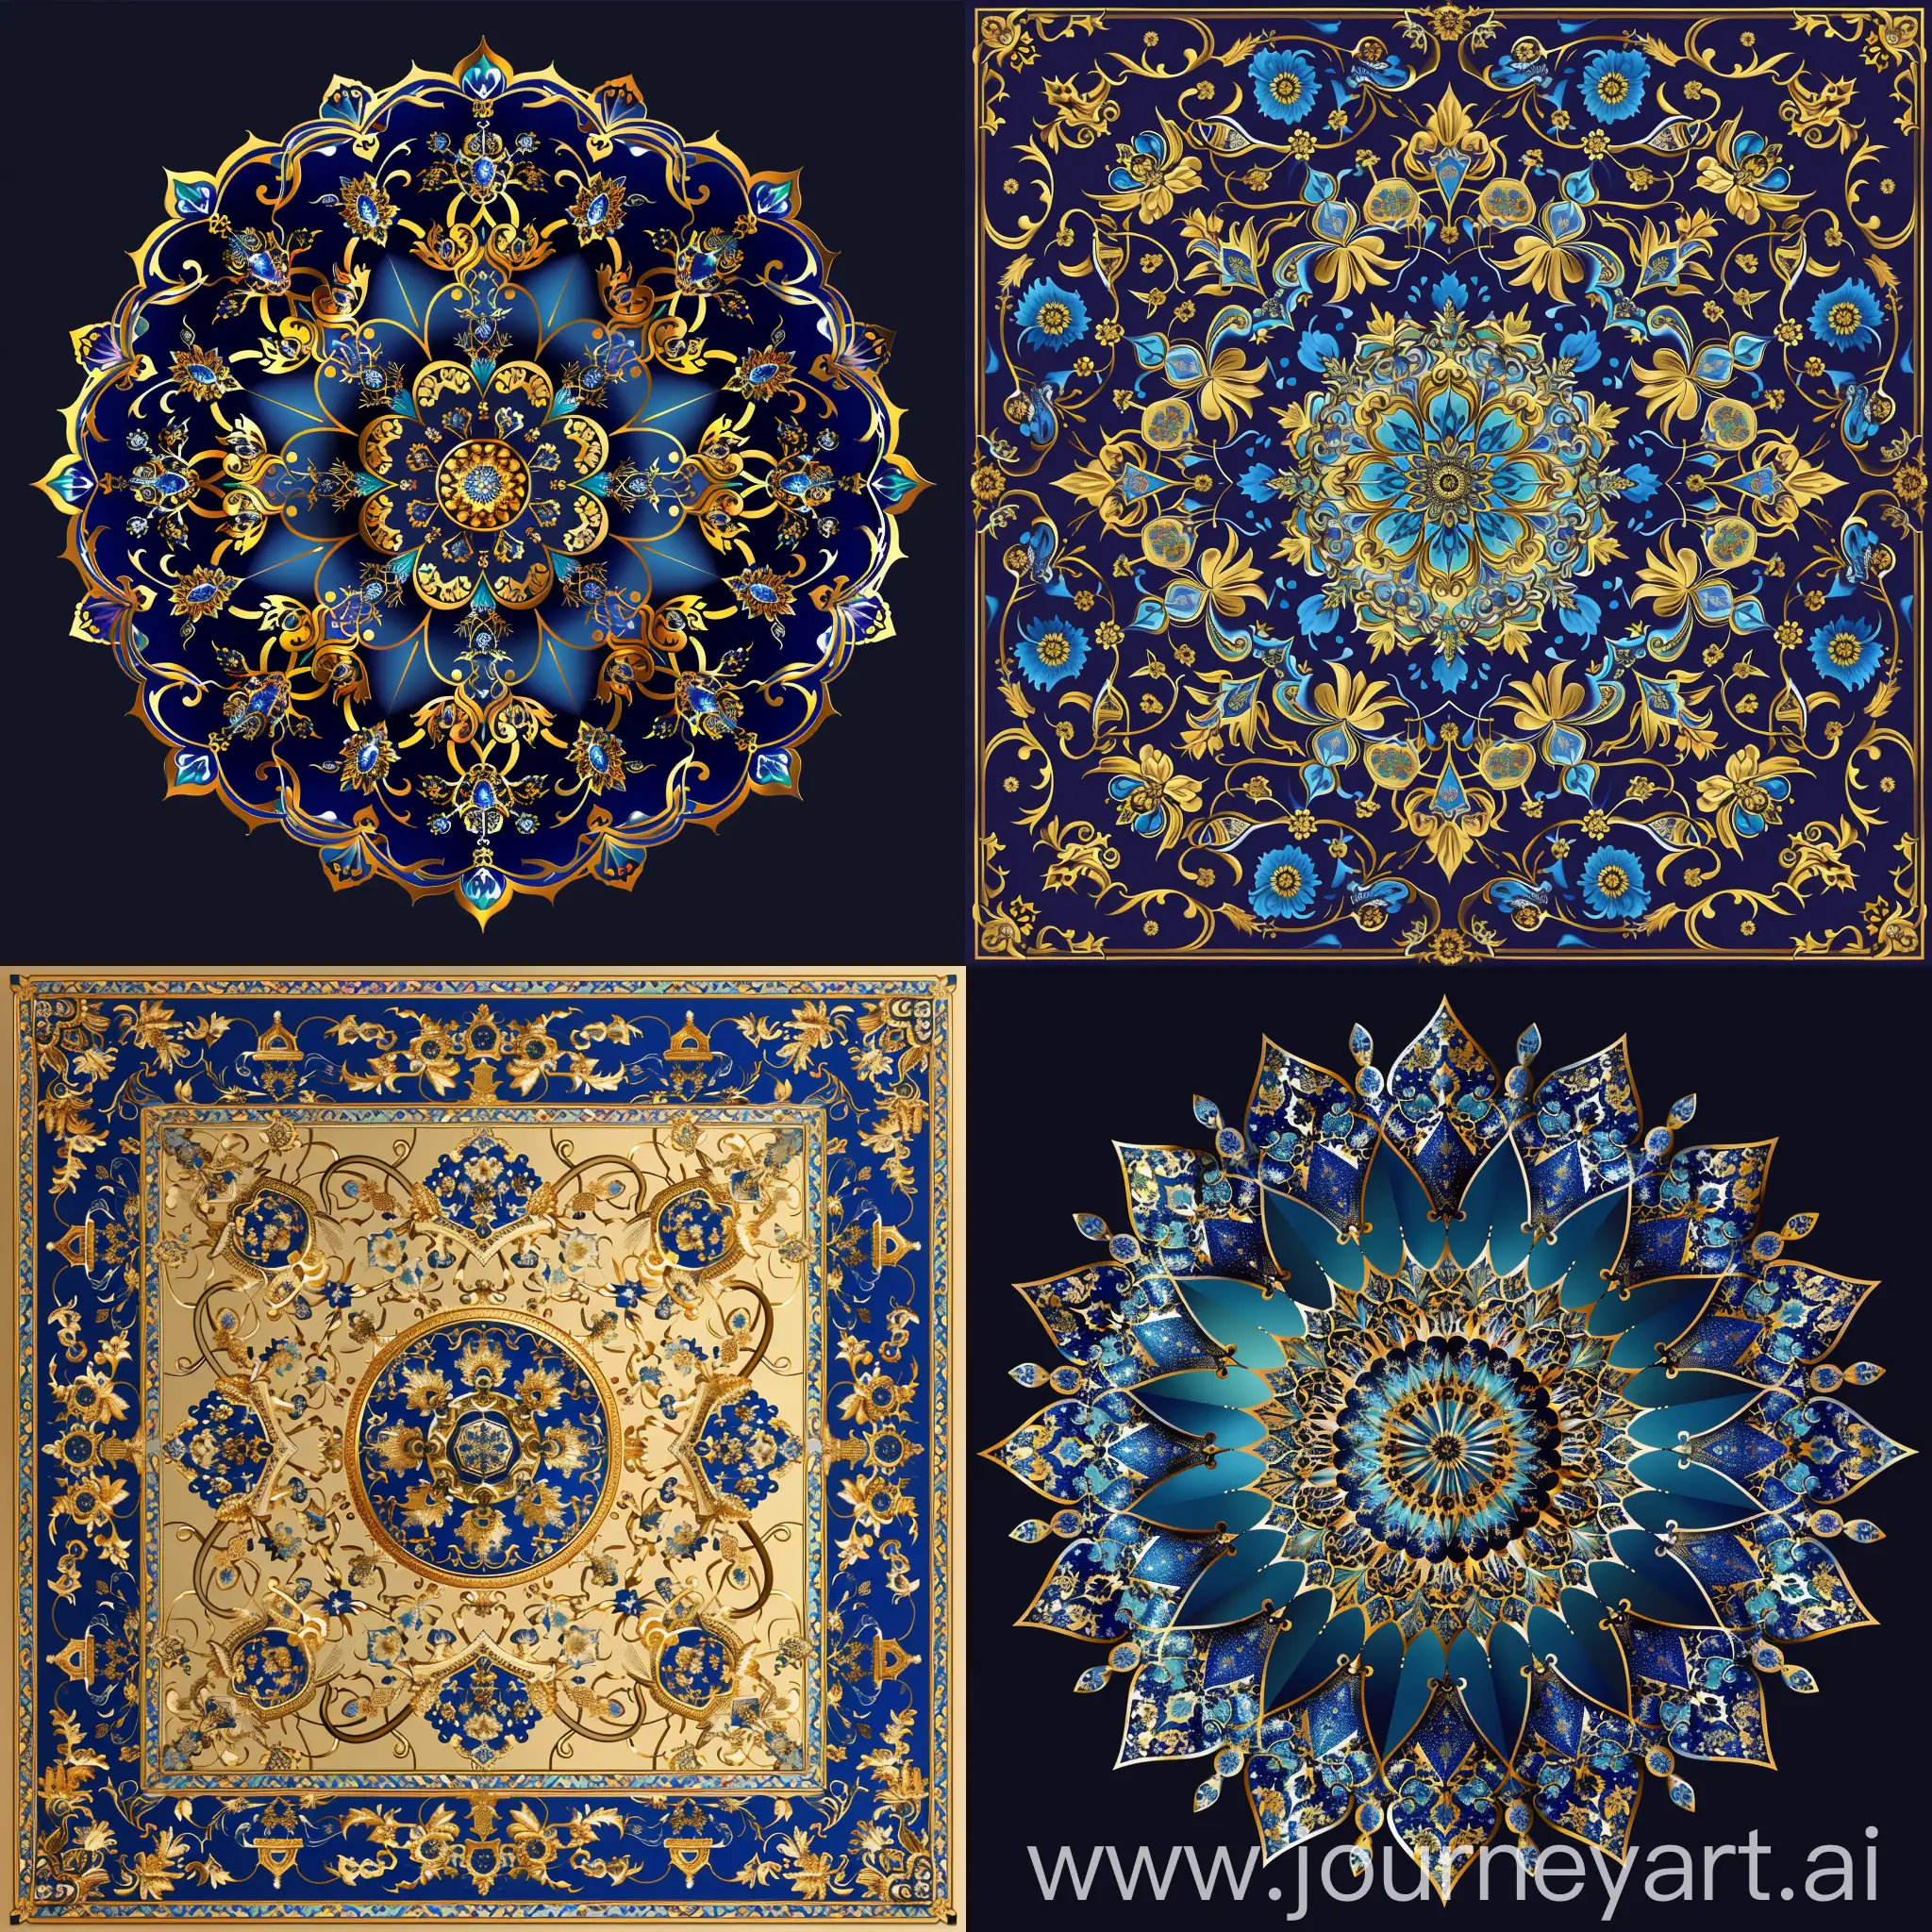 Generate an iranian tazhib high detailed and quality with blue and gold colors